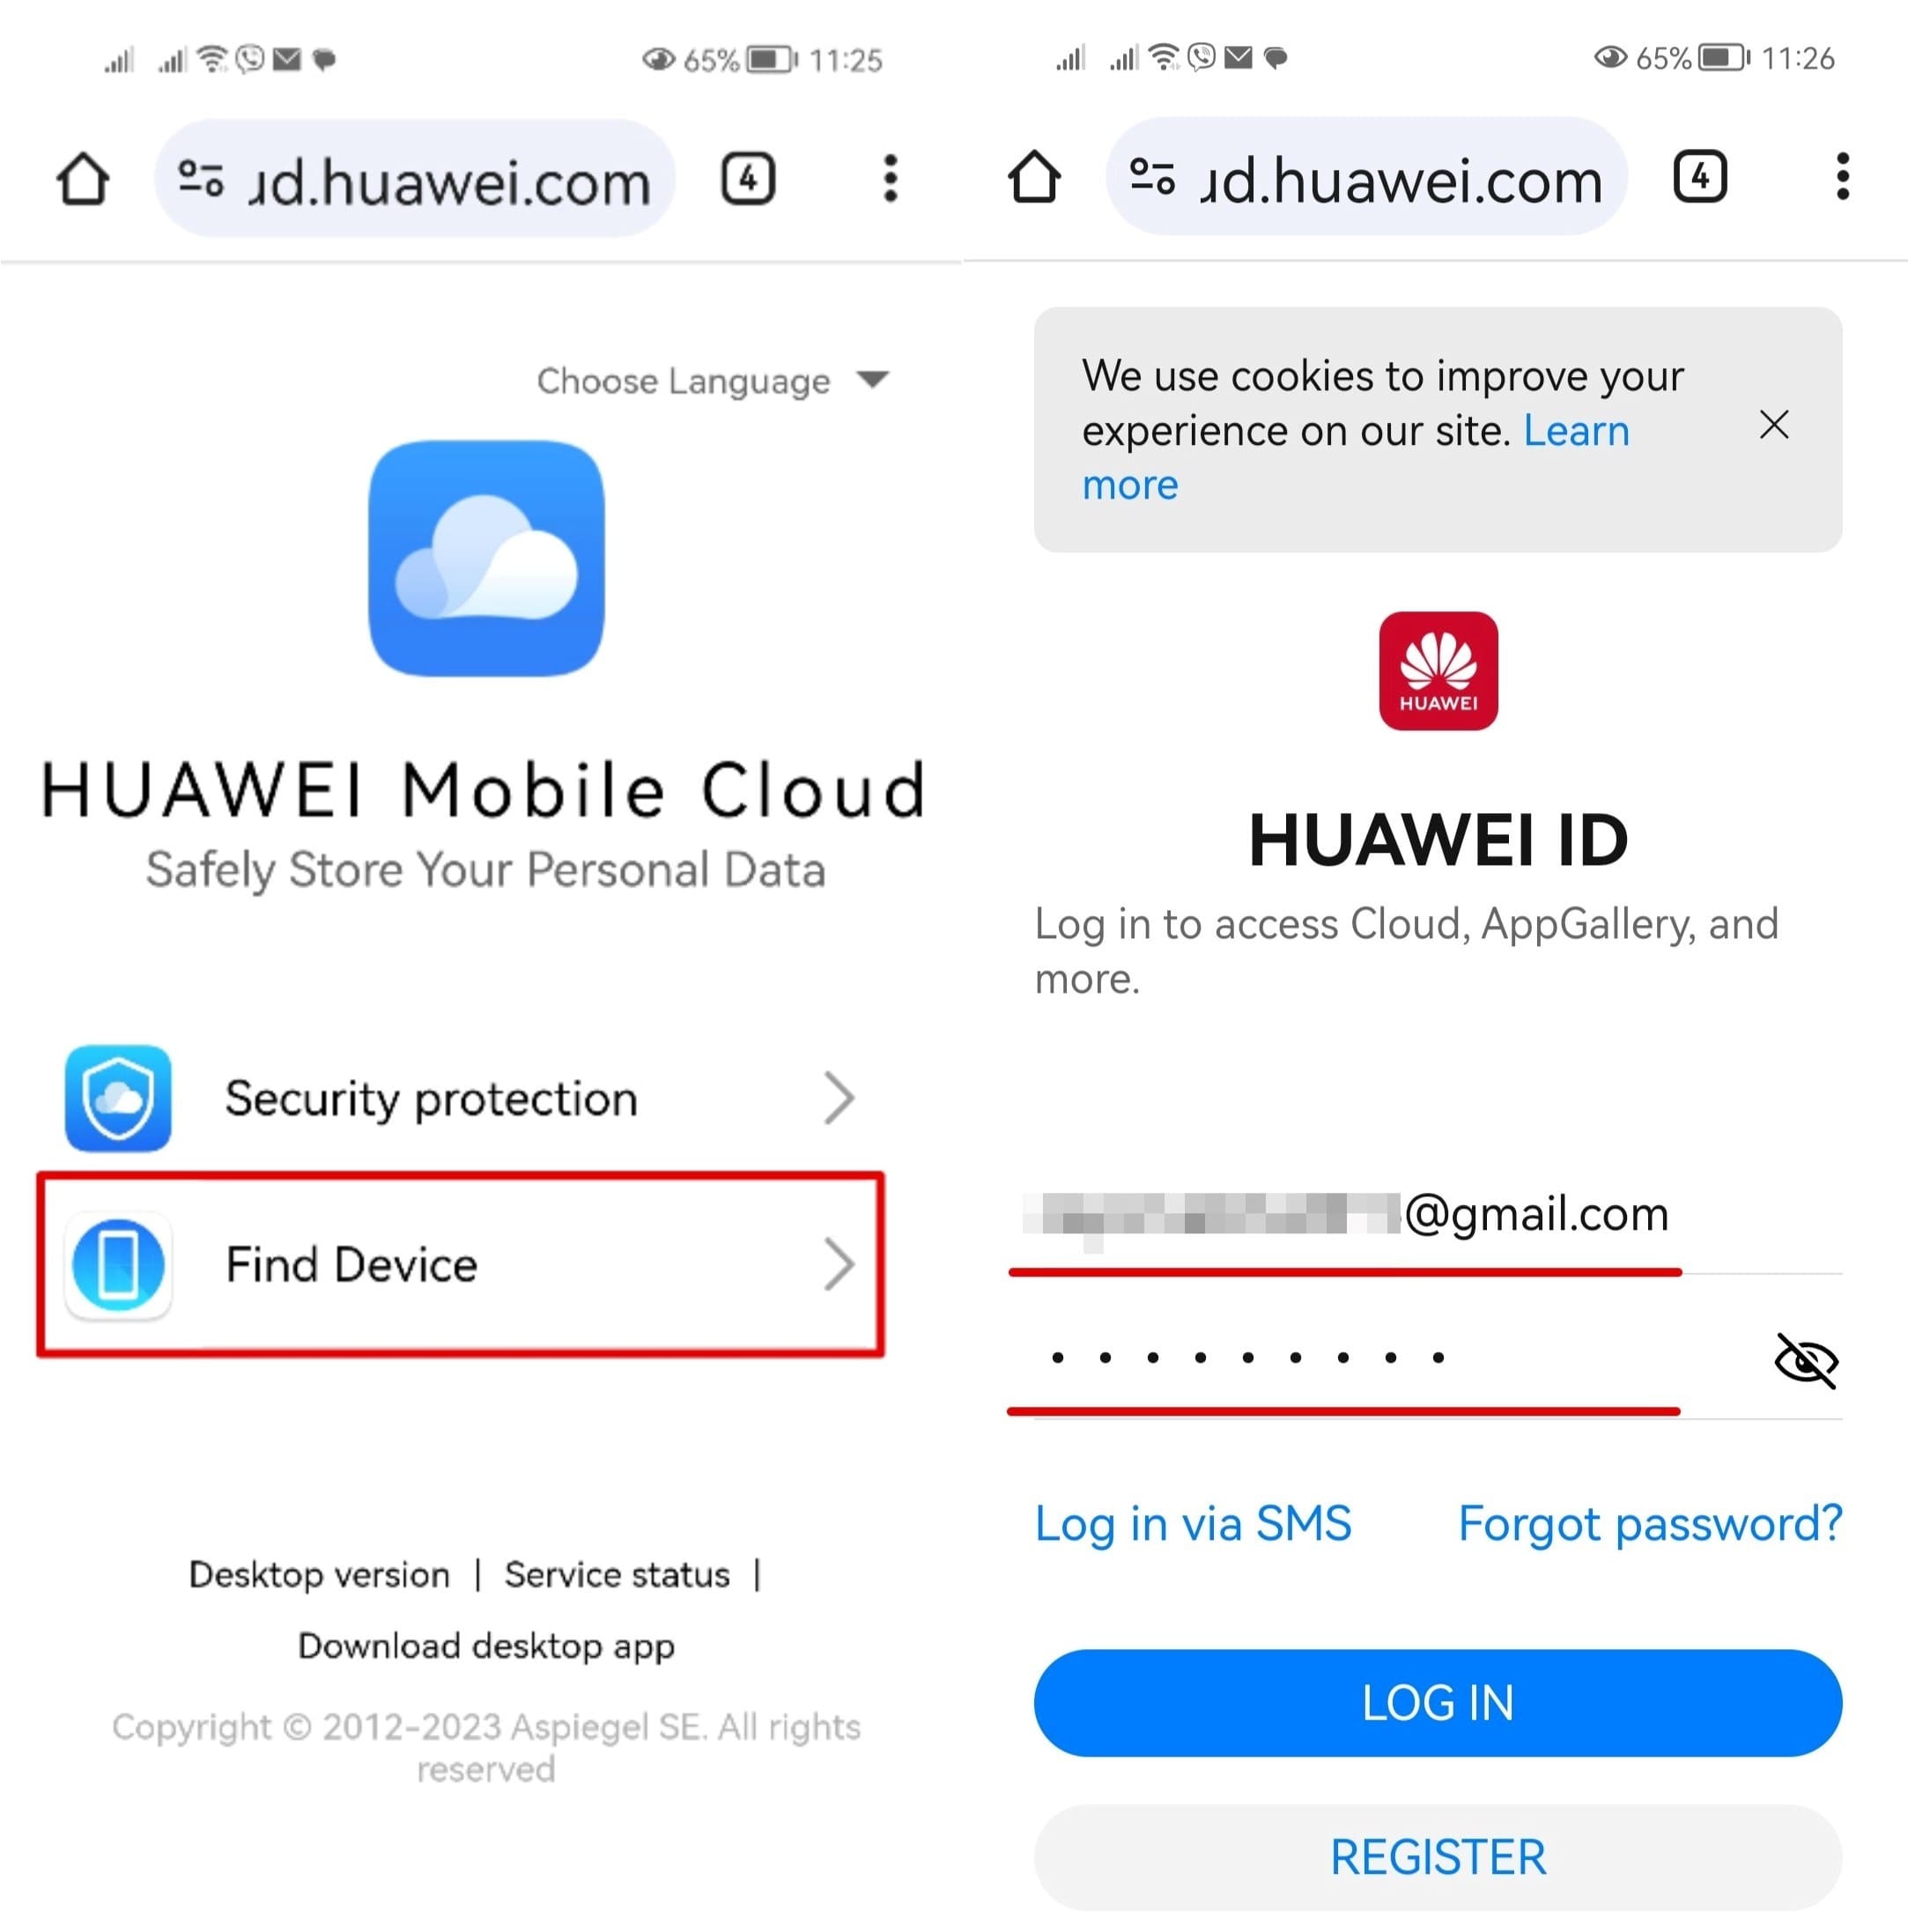 screenshots of Huawei mobile cloud page and Huawei account with login and password fields